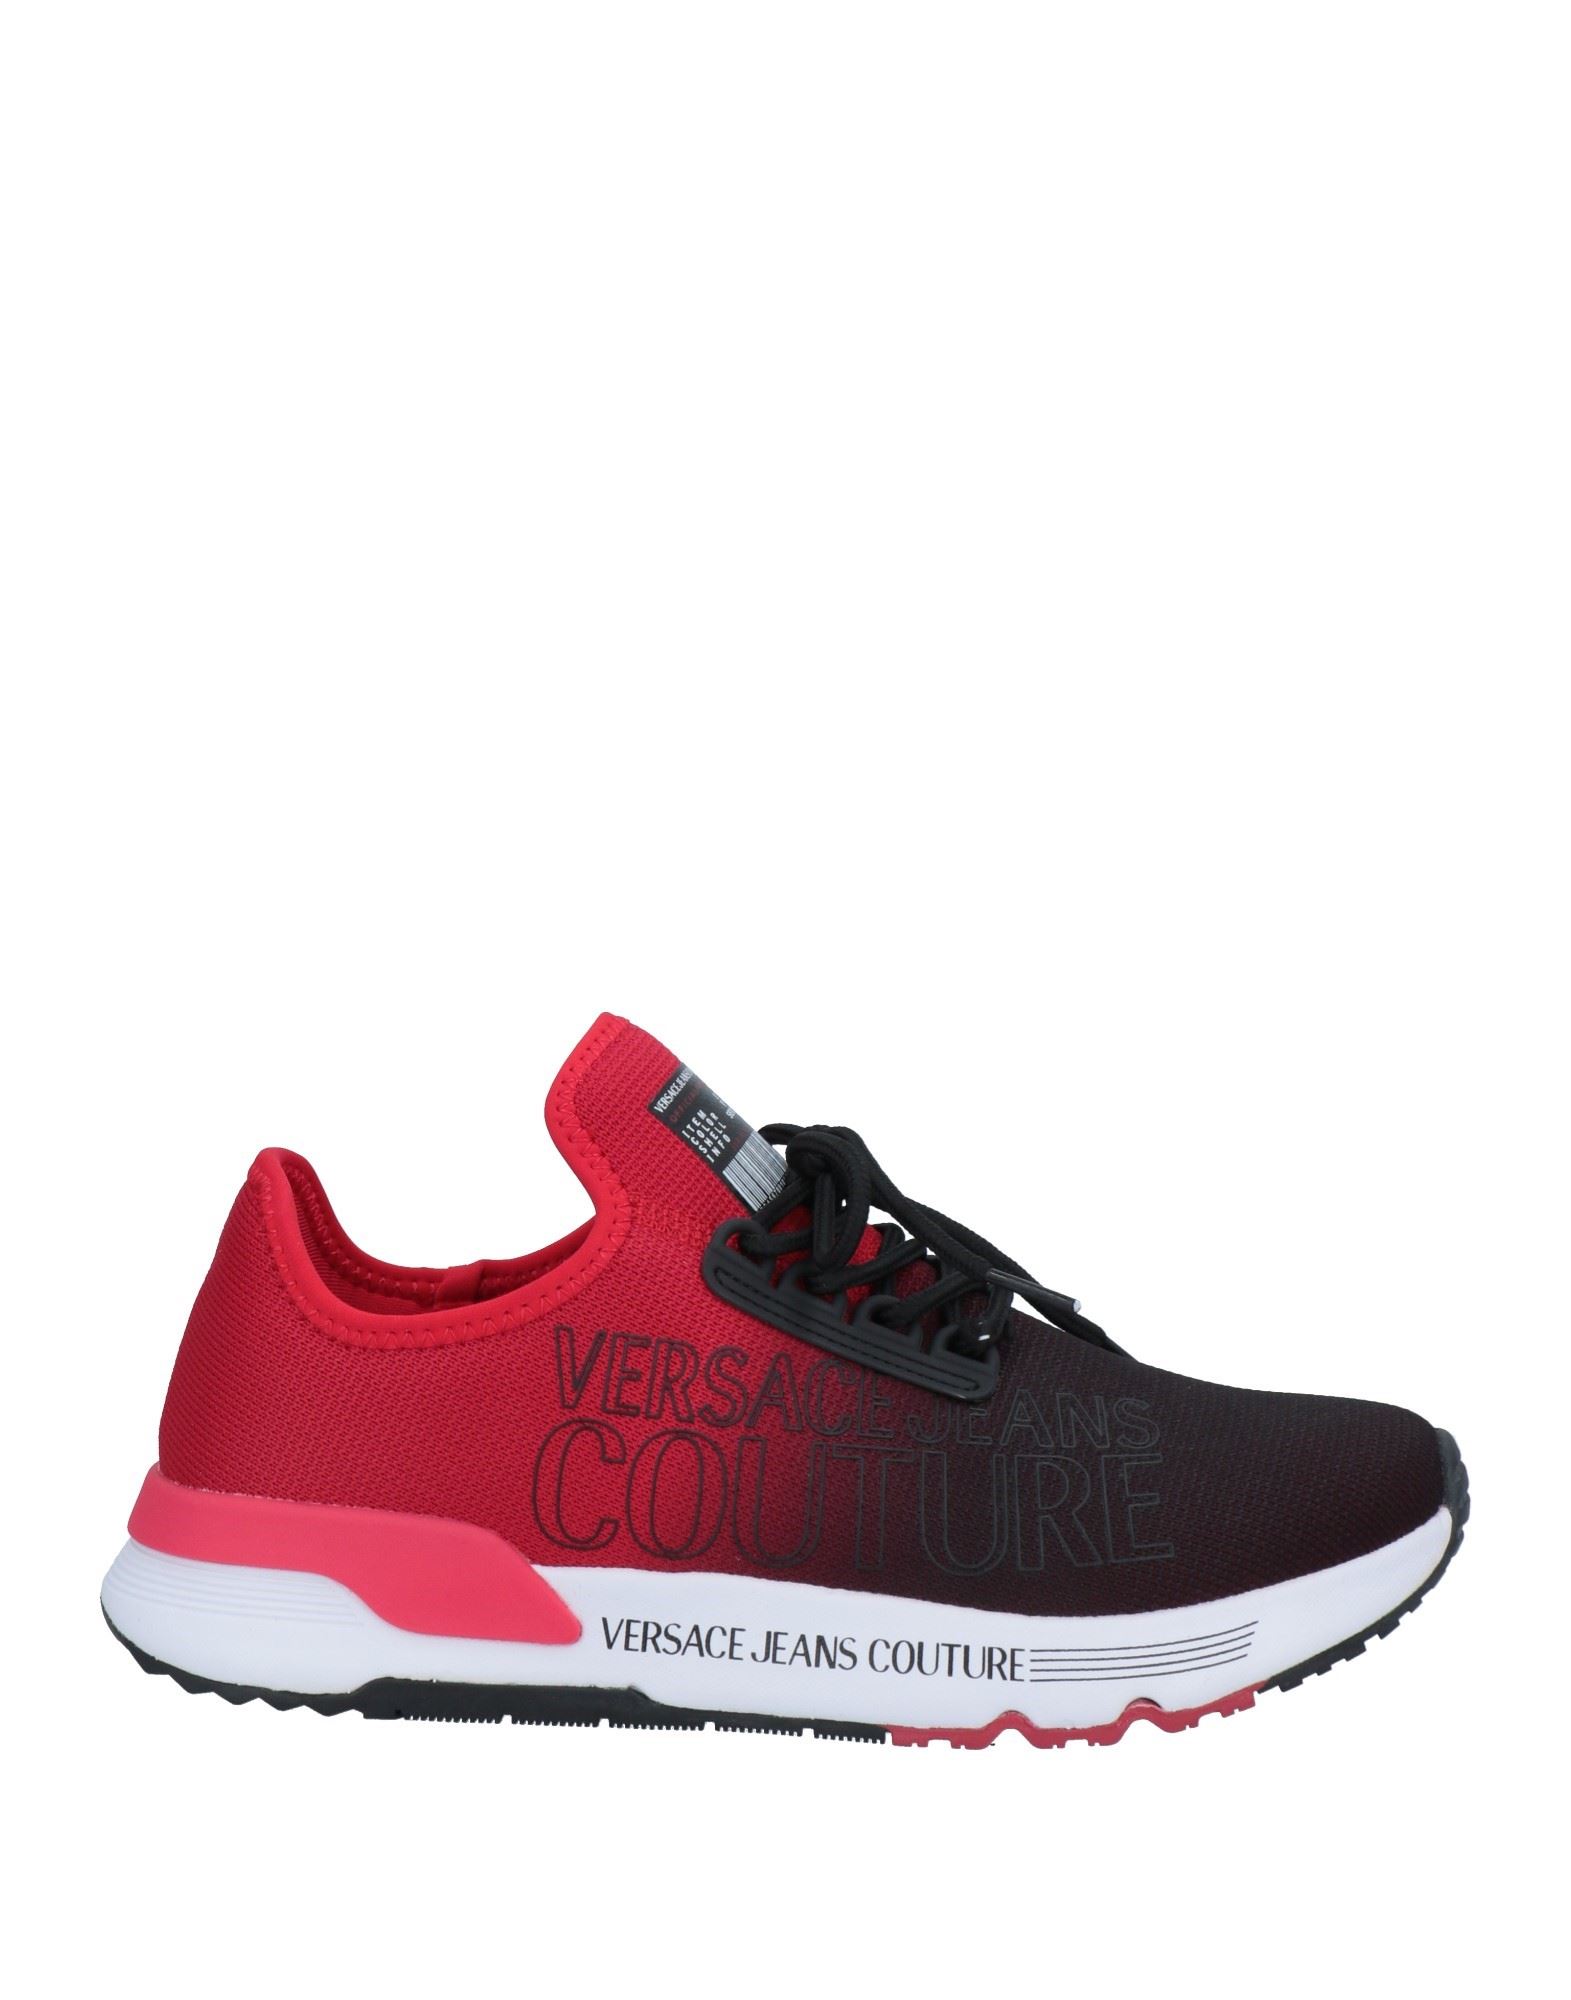 VERSACE JEANS COUTURE Sneakers Herren Rot von VERSACE JEANS COUTURE